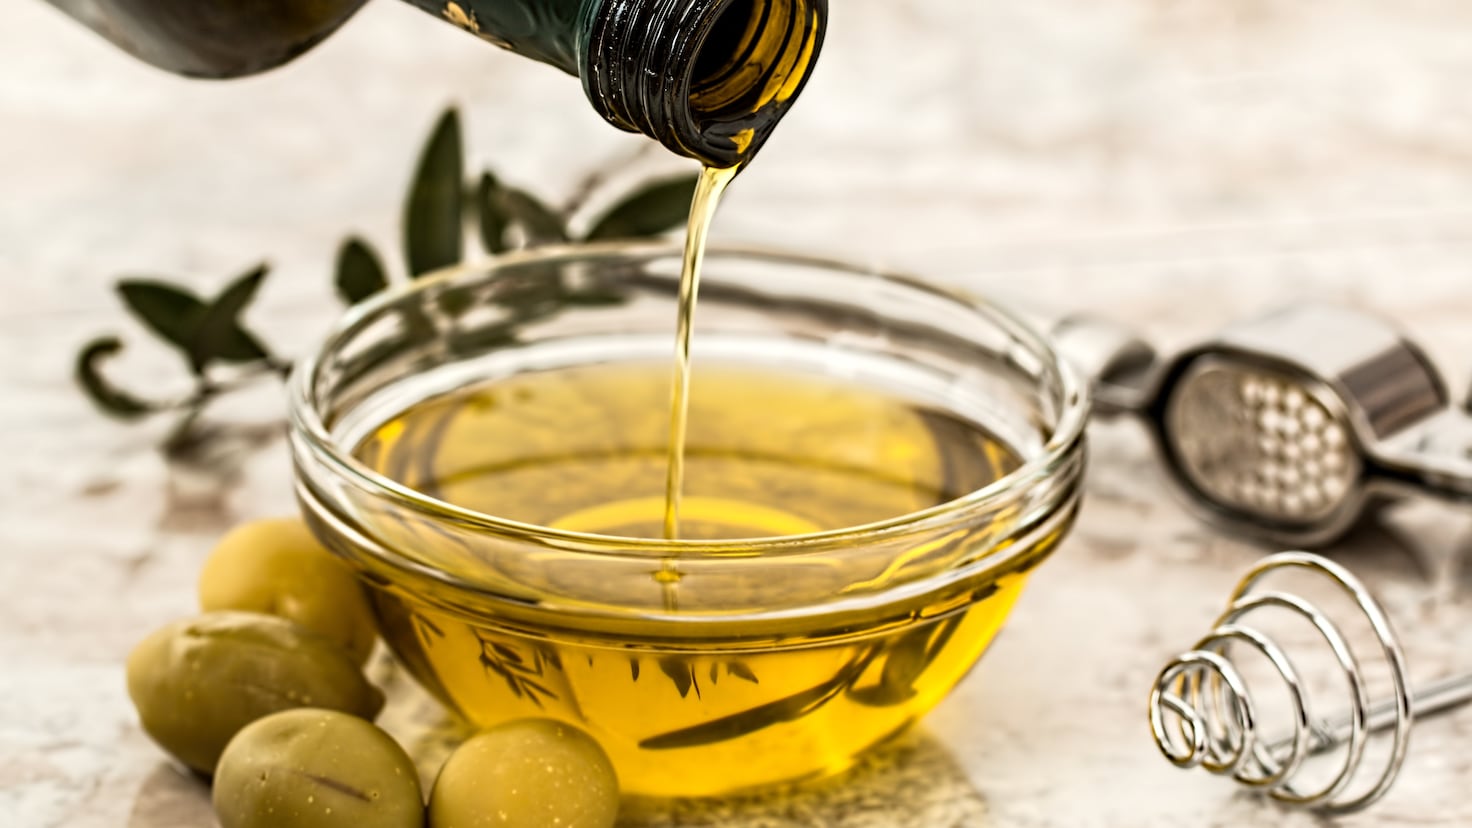 The supermarket that has olive oil for less than 9 euros per liter
